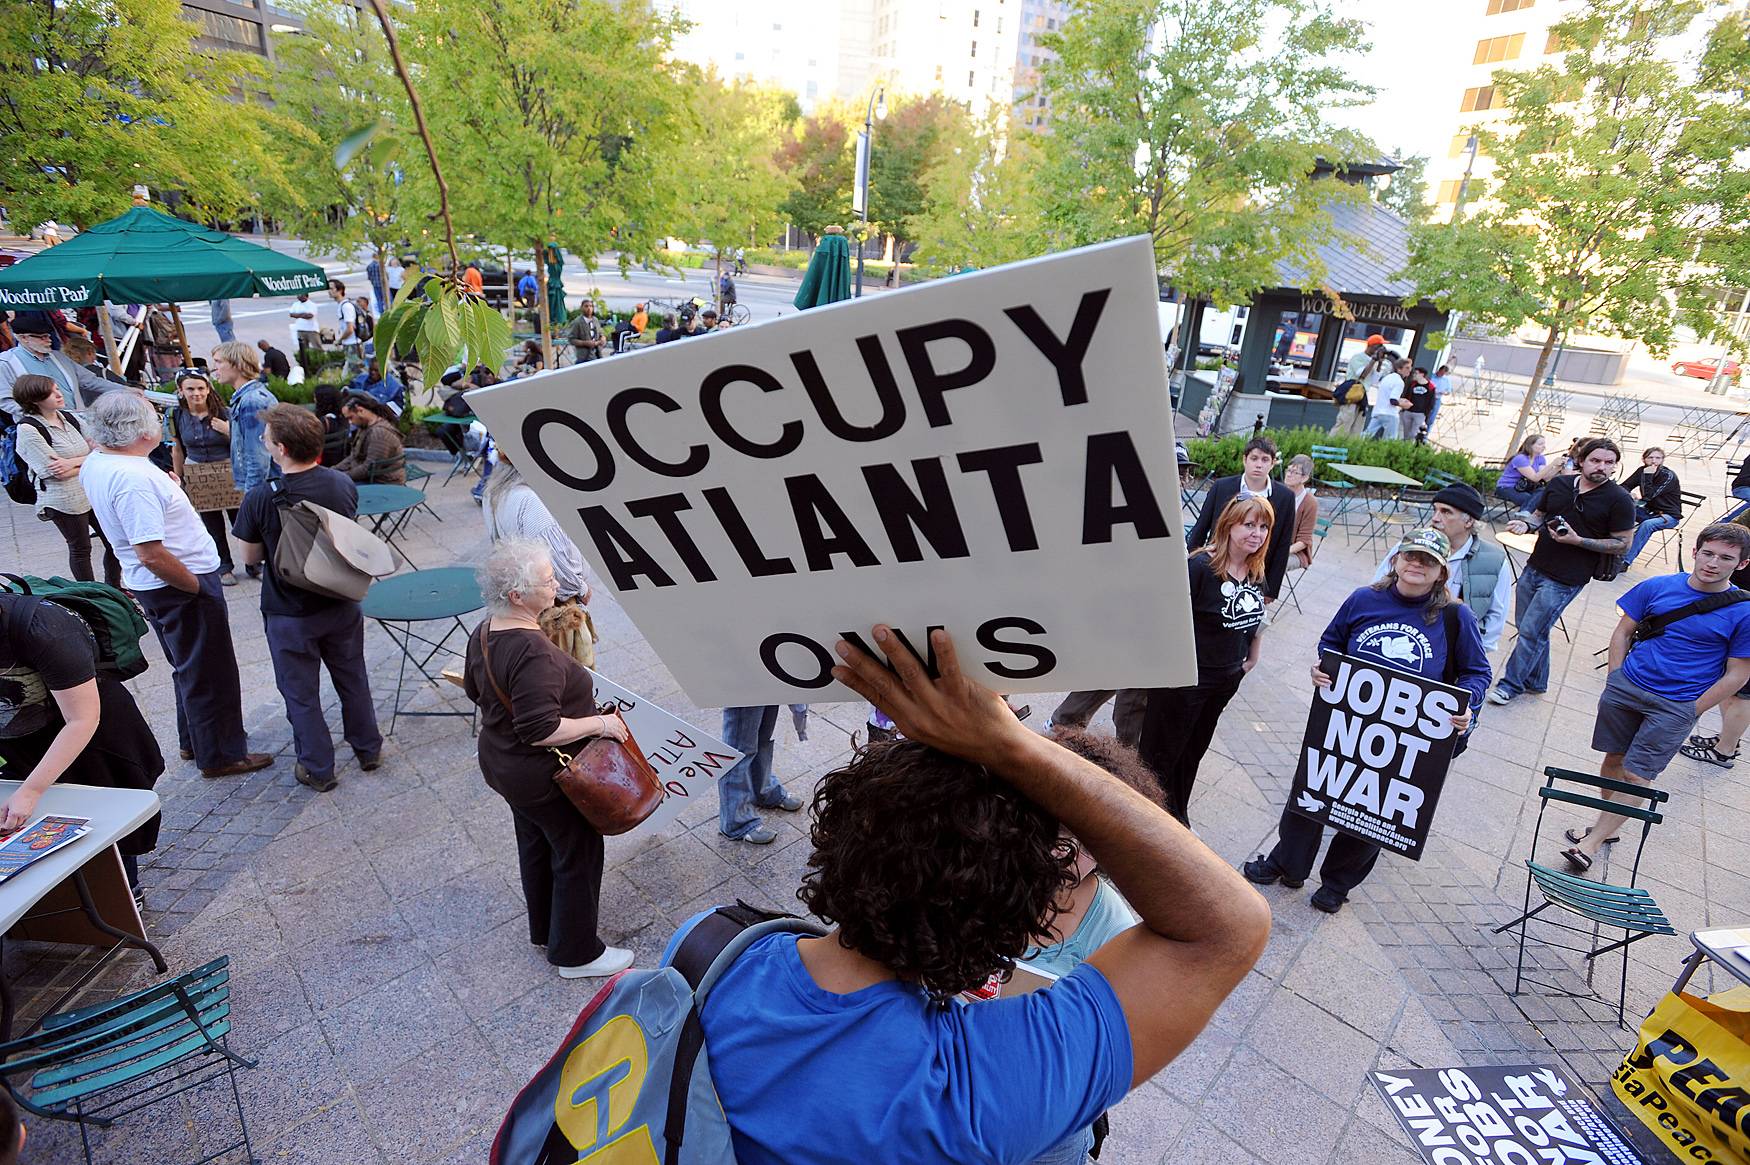 Occupy Atlanta Protesters Evicted From Park  - Atlanta Mayor Kasim Reed issued an executive order Wednesday, Oct.&nbsp; 12 requiring Occupy Atlanta protesters to vacate the six acres of Atlanta’s Woodruff Park by Monday. &nbsp;As protesters readied themselves to go to jail on Monday, the mayor announced that they could remain camped out in the park until Nov. 7.(Photo: ASSOCIATED PRESSAP)